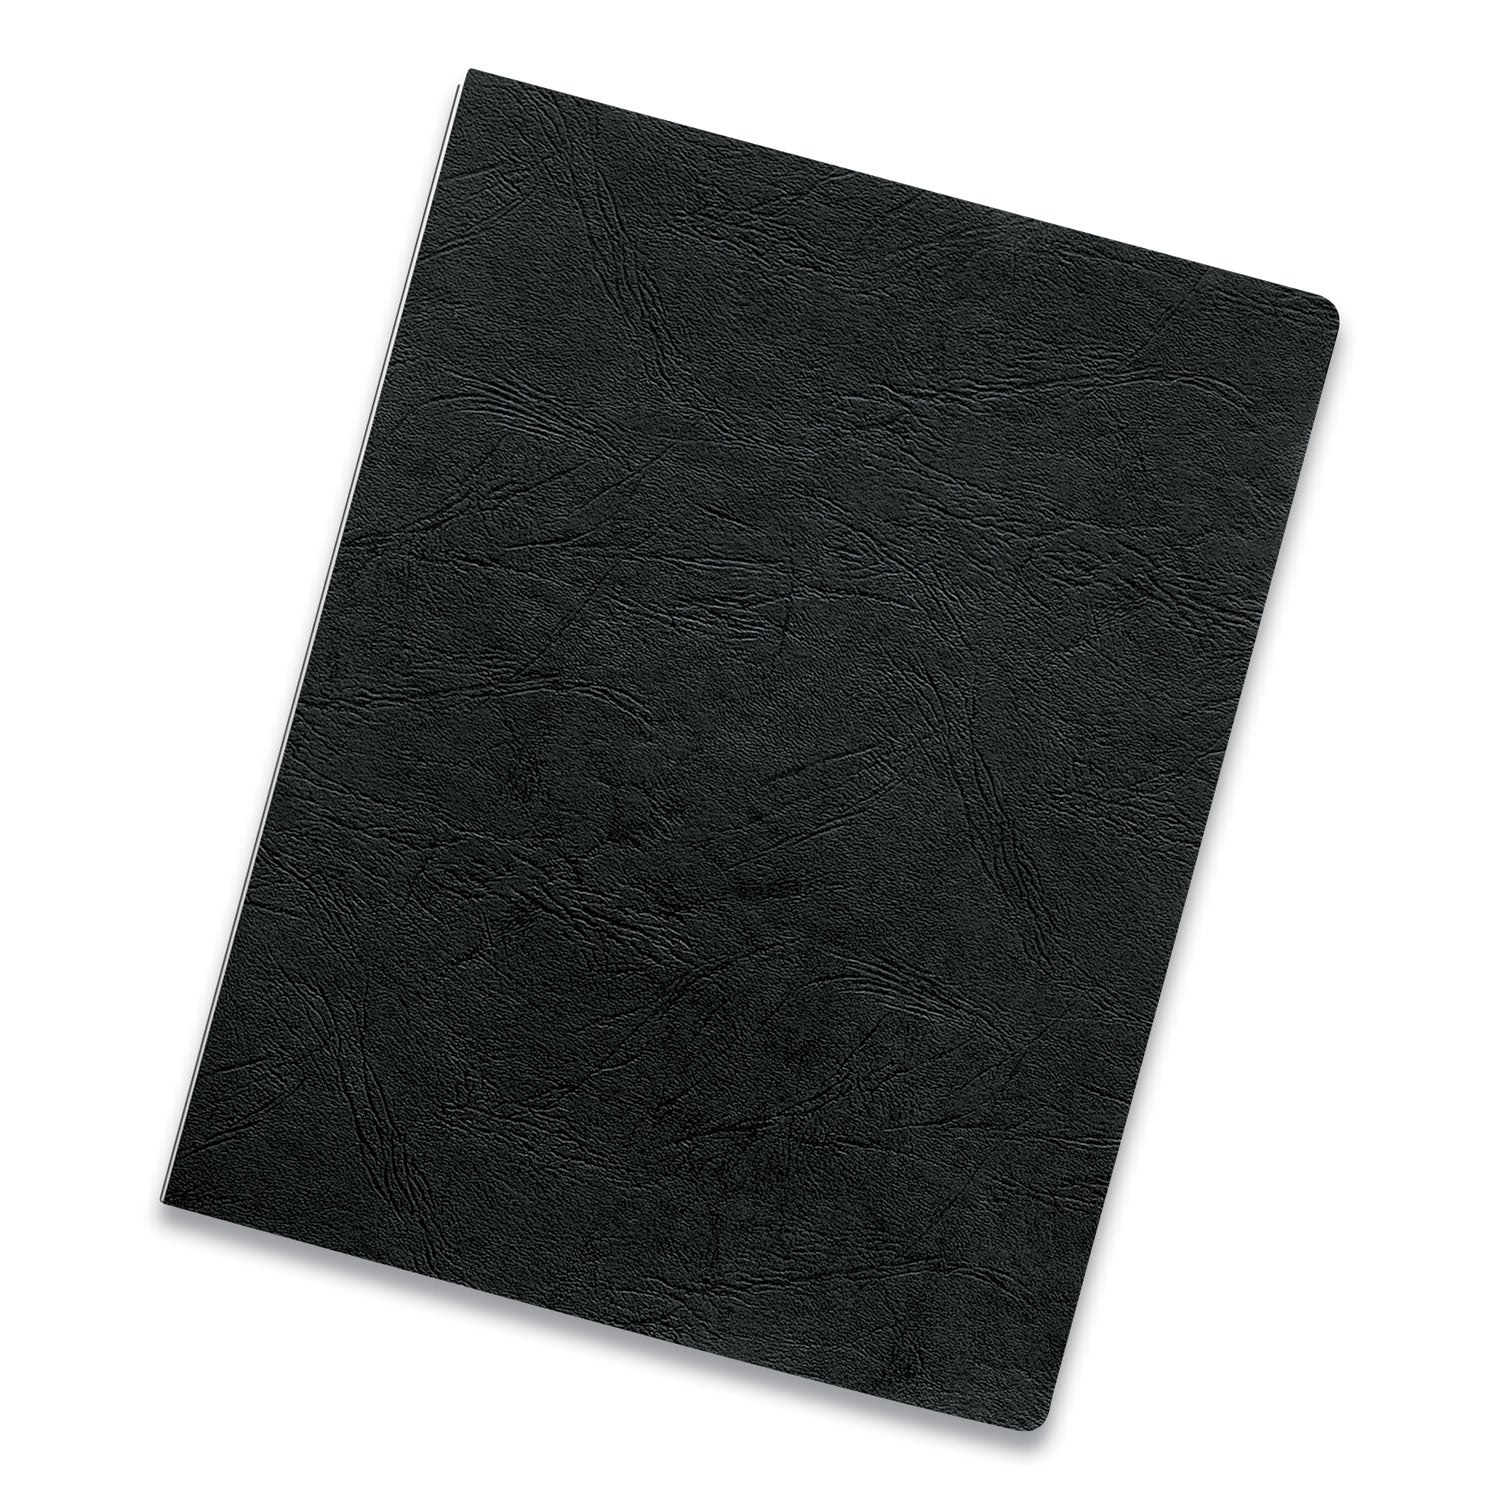 executive-leather-like-presentation-cover-black-11-x-85-unpunched-200-pack_fel5229101 - 2